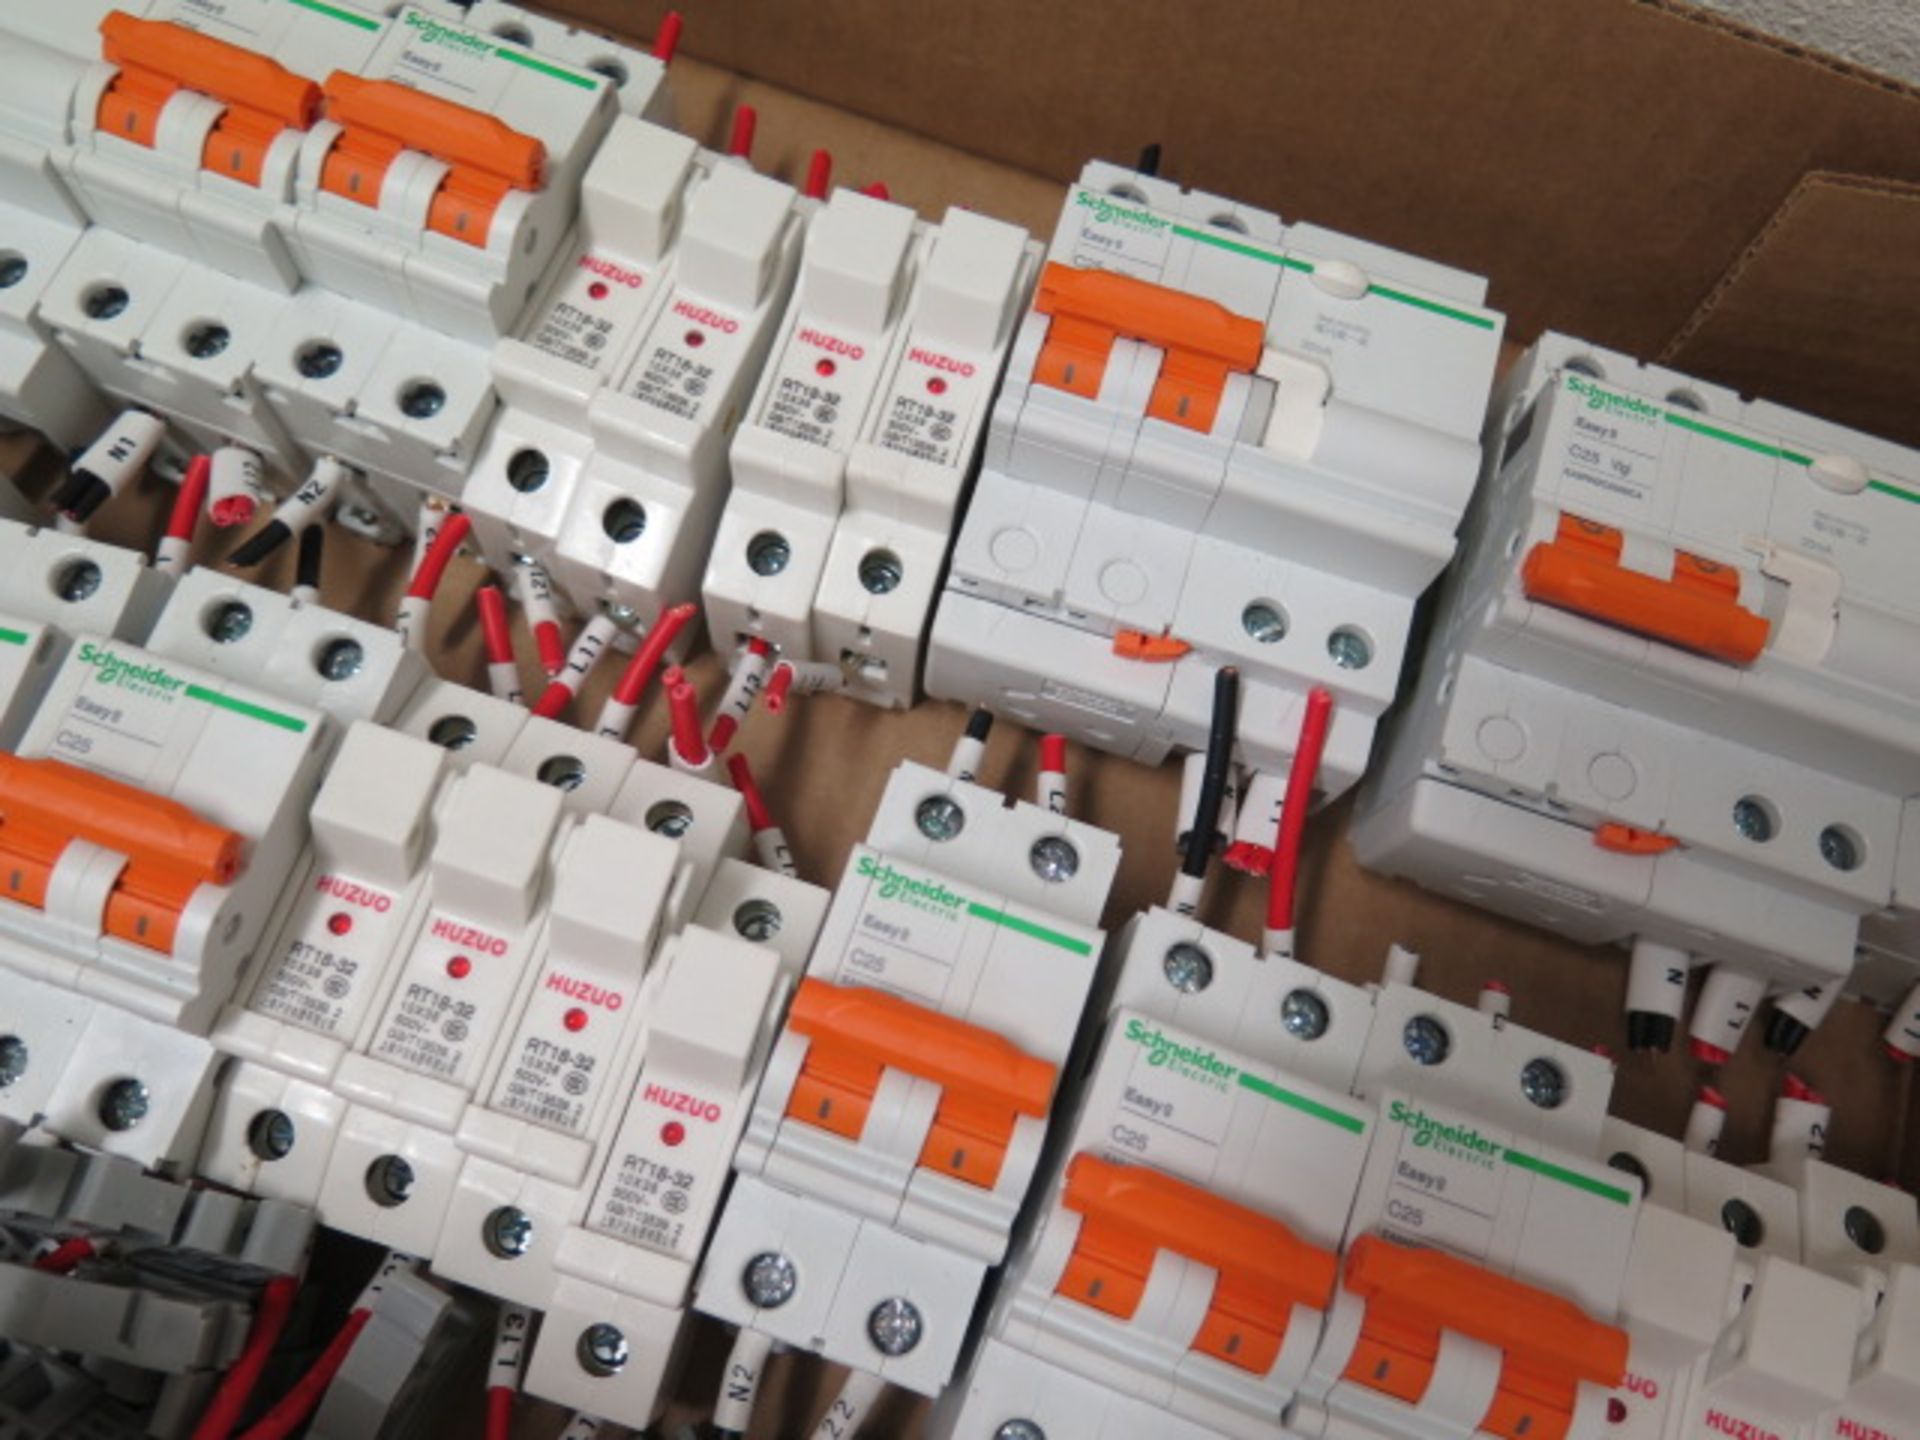 Schneider Easy8 C25 EA9AN2C25 Circuit Breakers (12) and Huzuo RT18-32 10X38 500V G3/T13539.2 Fuse Bl - Image 4 of 7